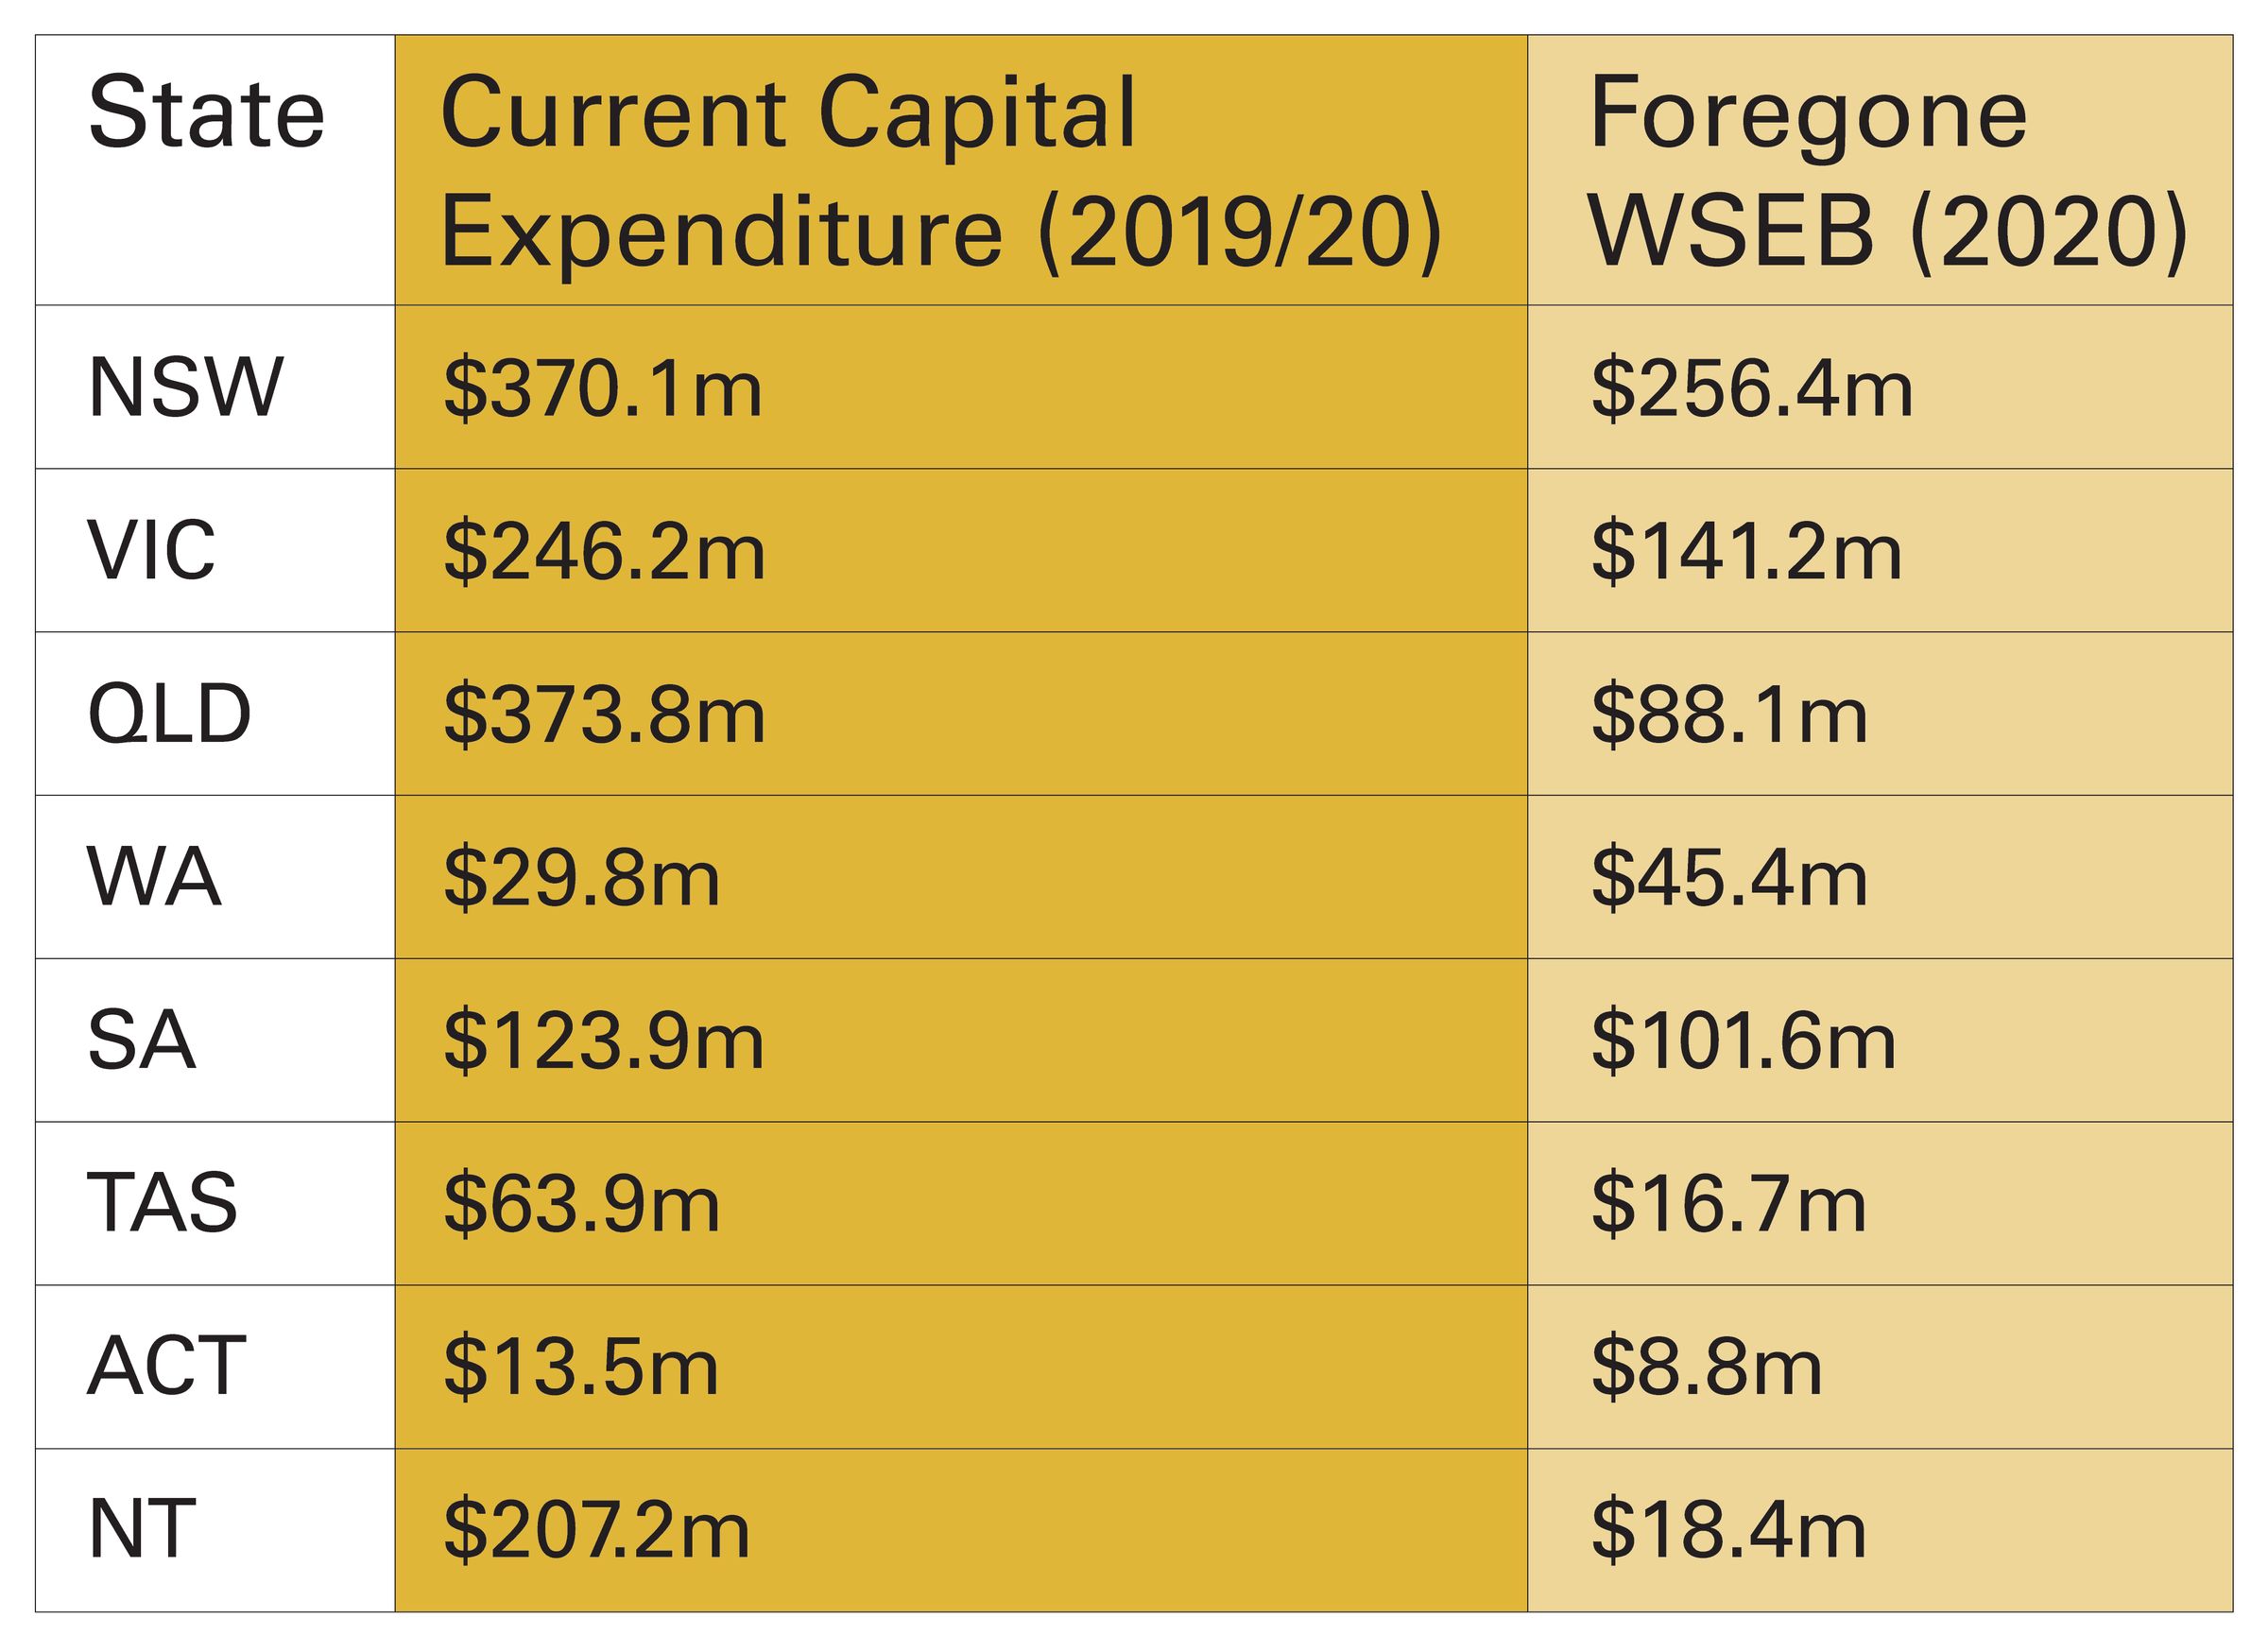 Table showing the current annual cost per state. ACT spends approximately 8 million, NSW spends approximately 250 million, NT spends approximately 18 million, QLD spends approximately 88 million, SA spends approximately 100 million, TAS spends approximately 17 million, VIC spends approximately 140 million, WA spends approximately 45 million, Total spending across Australia is approximately 670 million